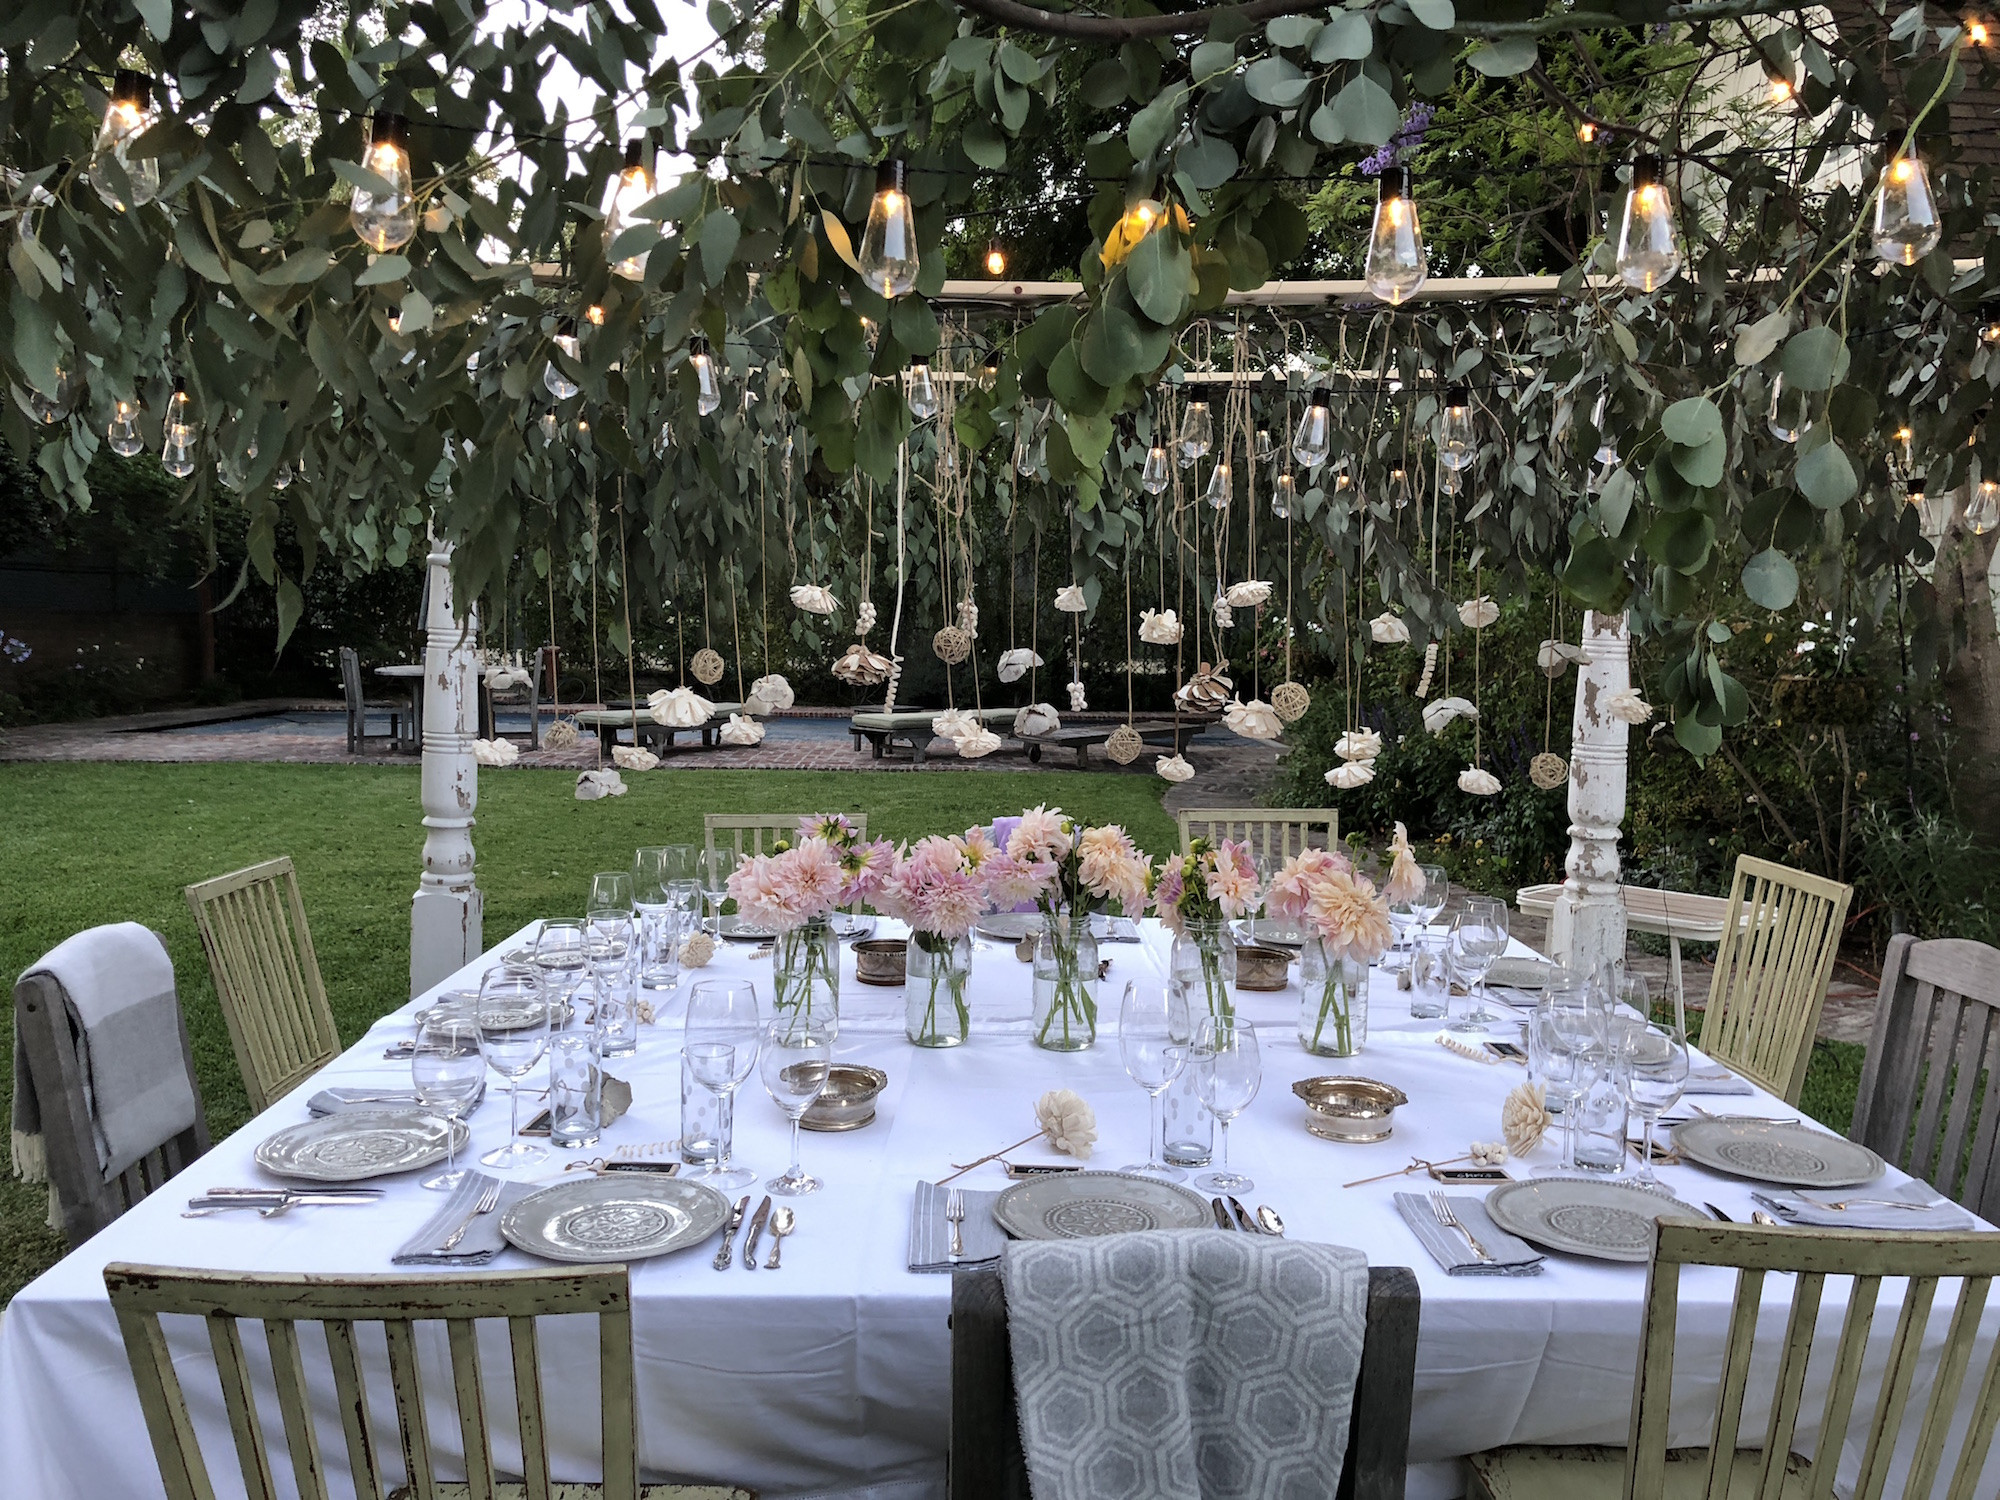 Backyard Dinner Party Ideas
 How to Set an Outdoor Table